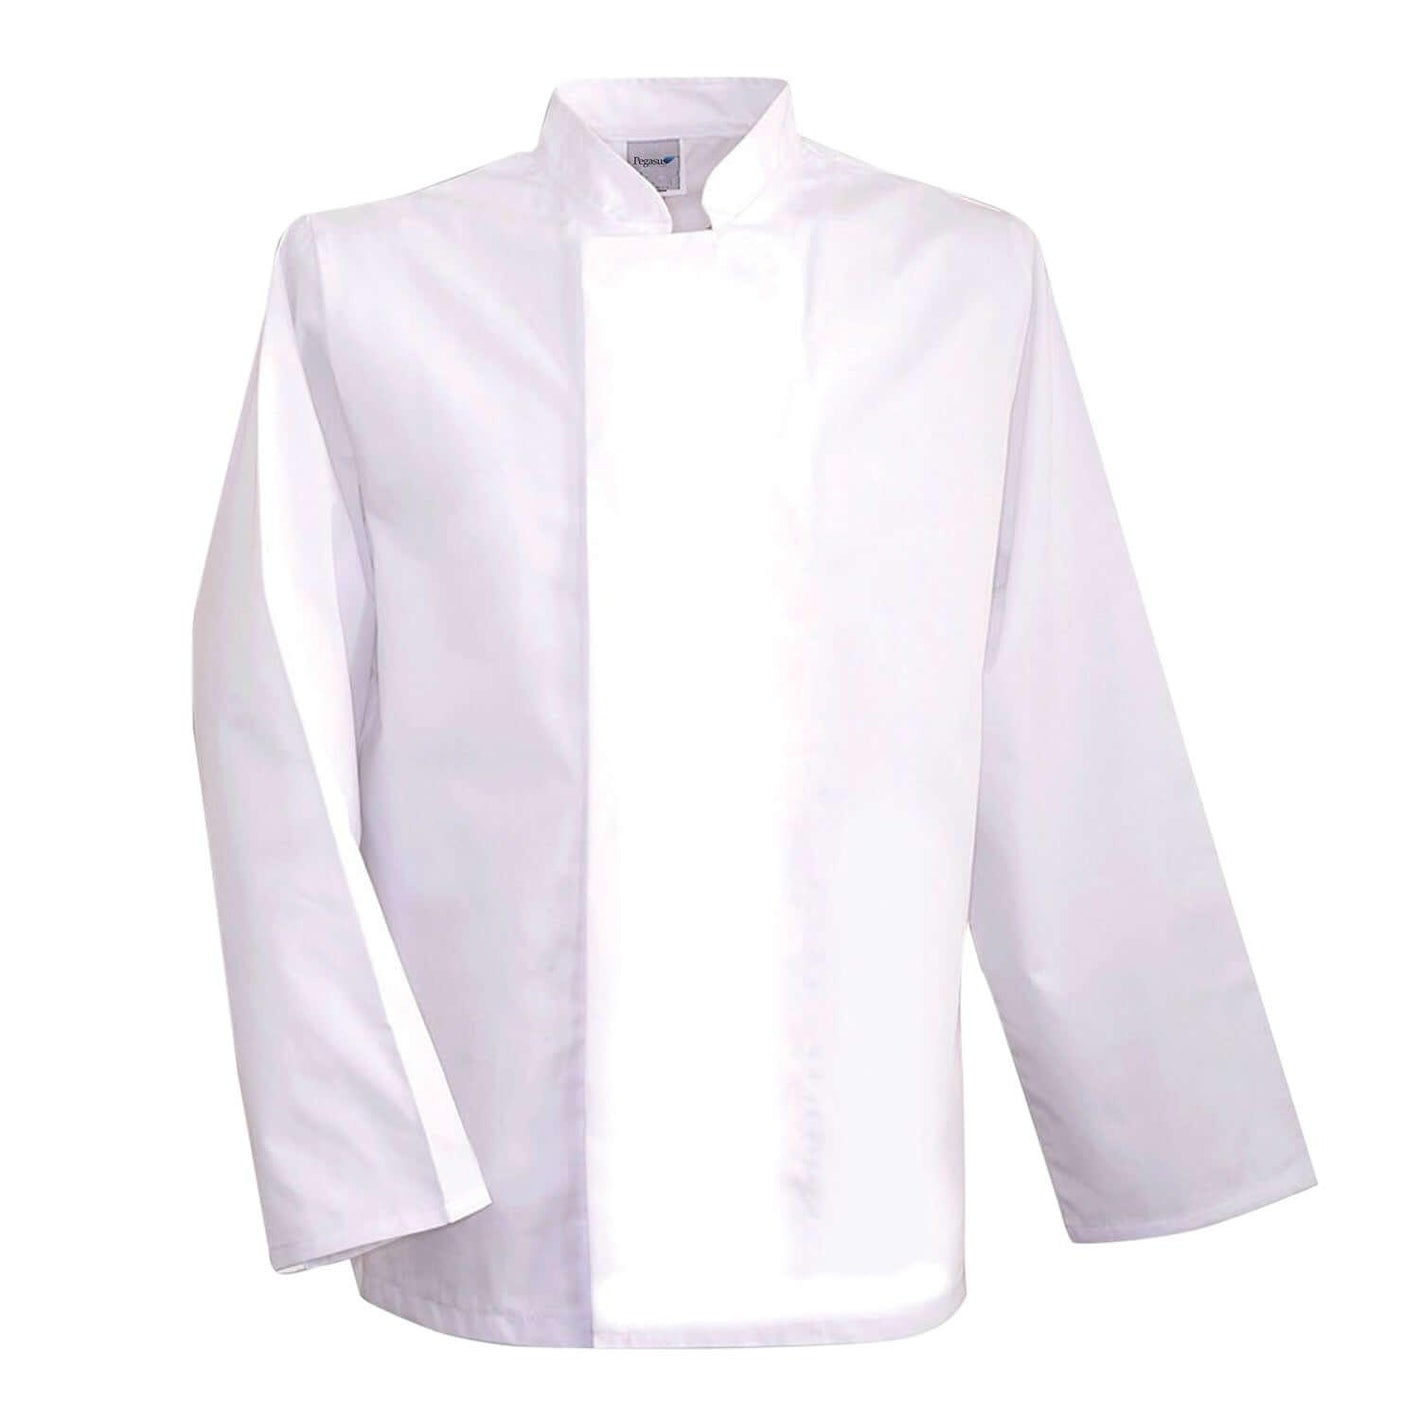 Pegasus White Long Sleeve Chef Jackets with Concealed Studs